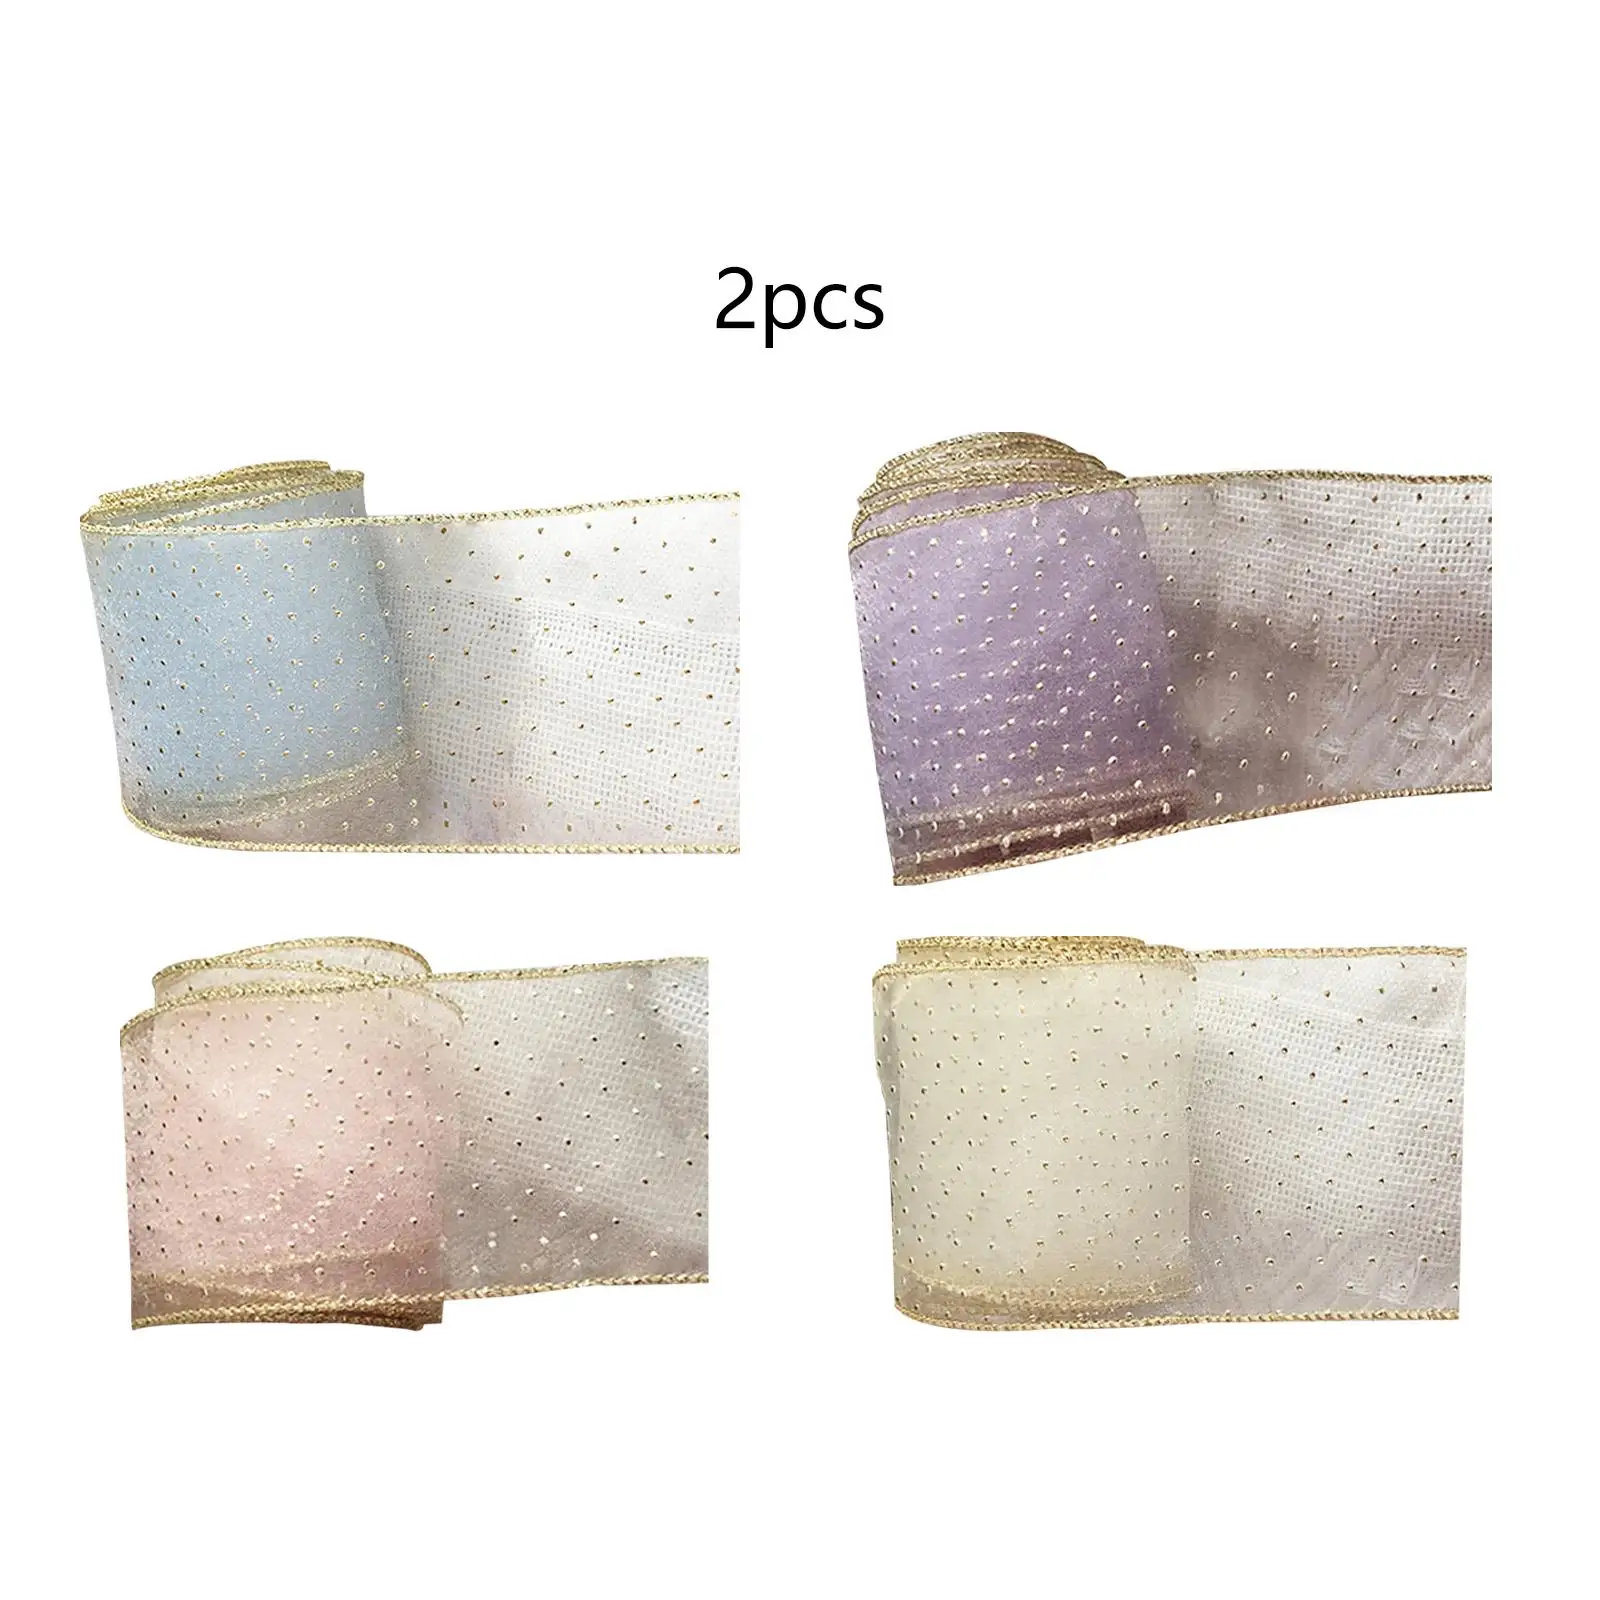 2x Bronzing Ribbon Wired Gold Dot Tulle Sheer Ribbon for Wreaths Floral Bow Craft Bouquets Wrapping Christmas Holiday